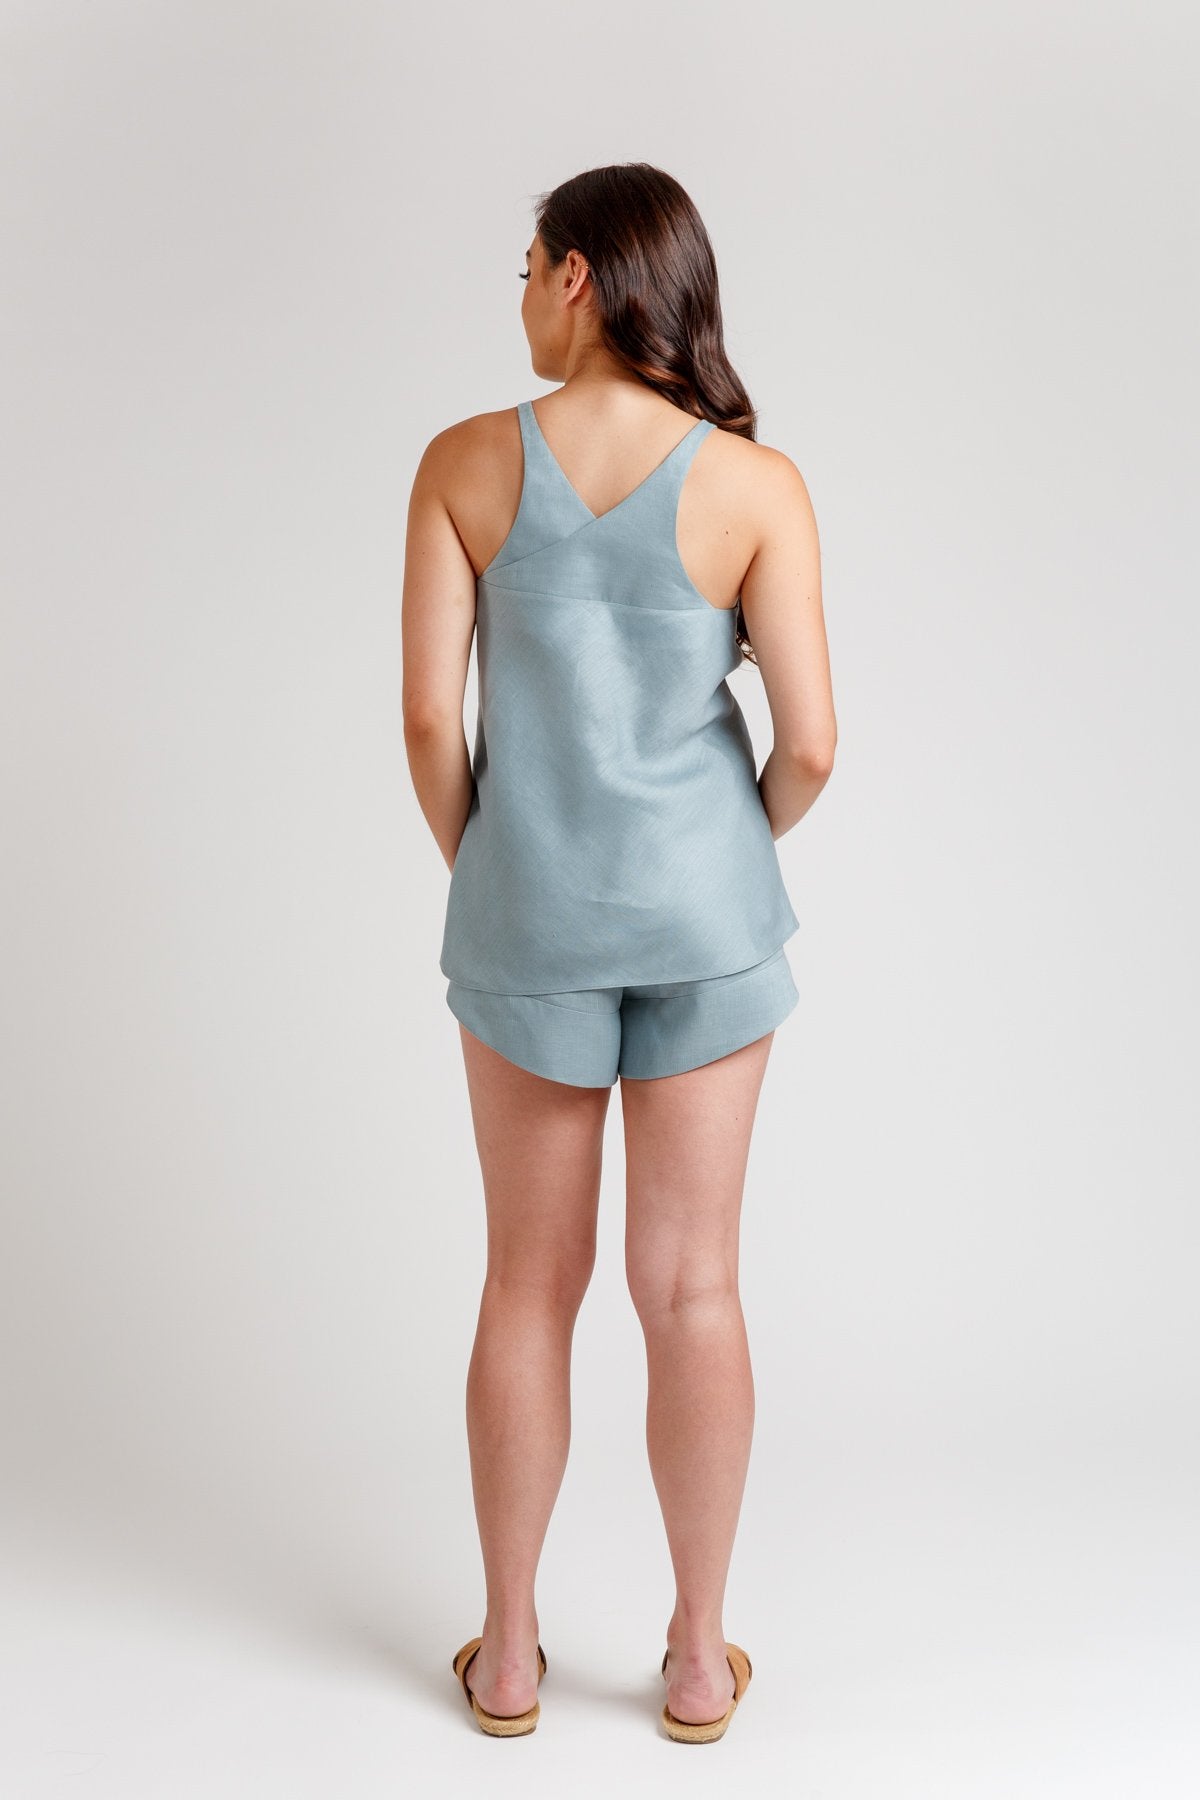 Reef Camisole and Shorts Set by Megan Nielsen Patterns